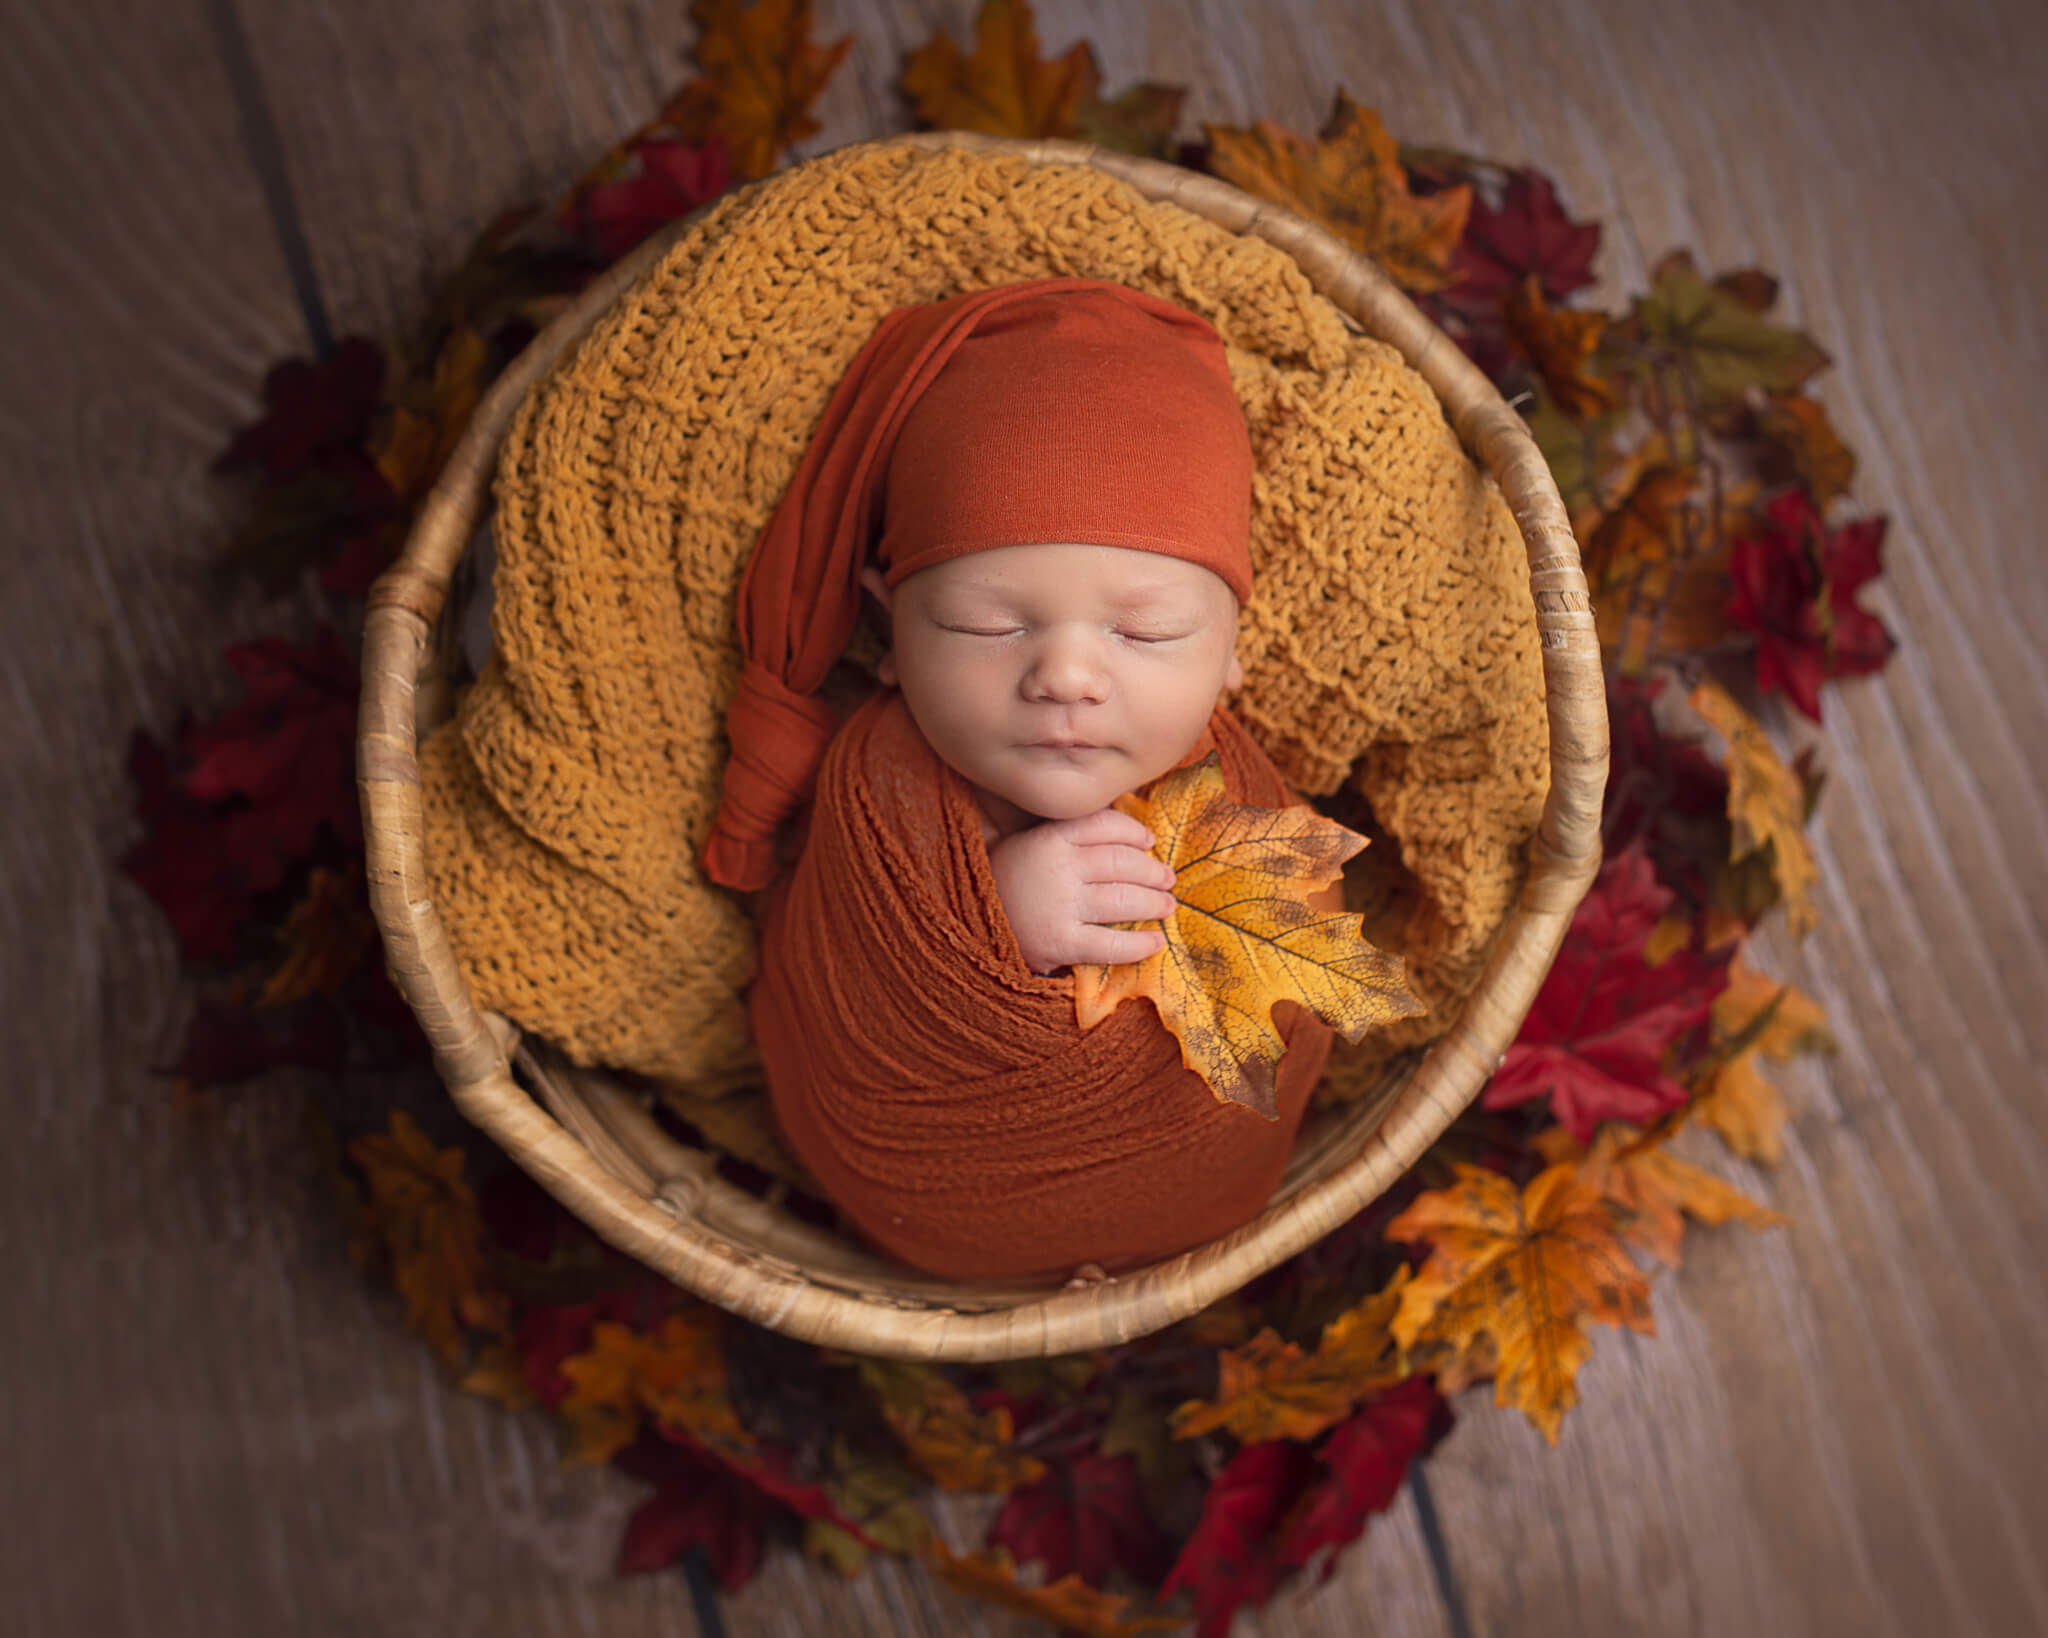 pediatric speech therapists in akron OH in blog photo of adorable newborn swaddled in a dark orange blanket inside a basket surrounded by leaves